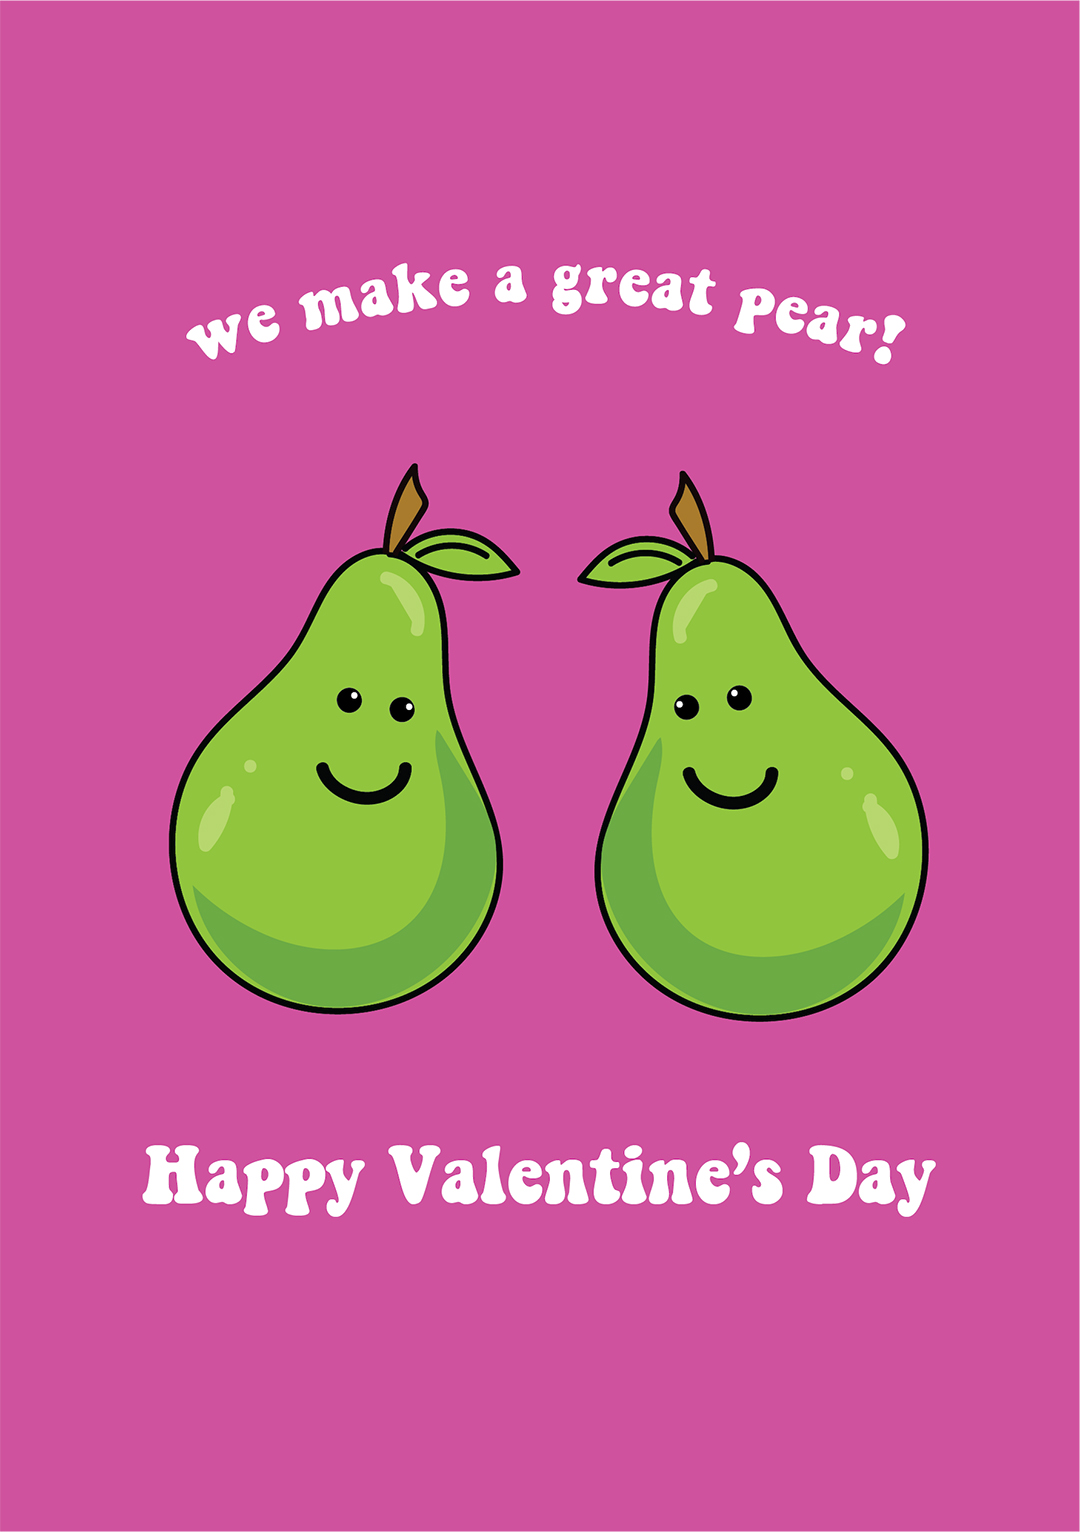 We Make A Great Pear! - Valentine's Day Card